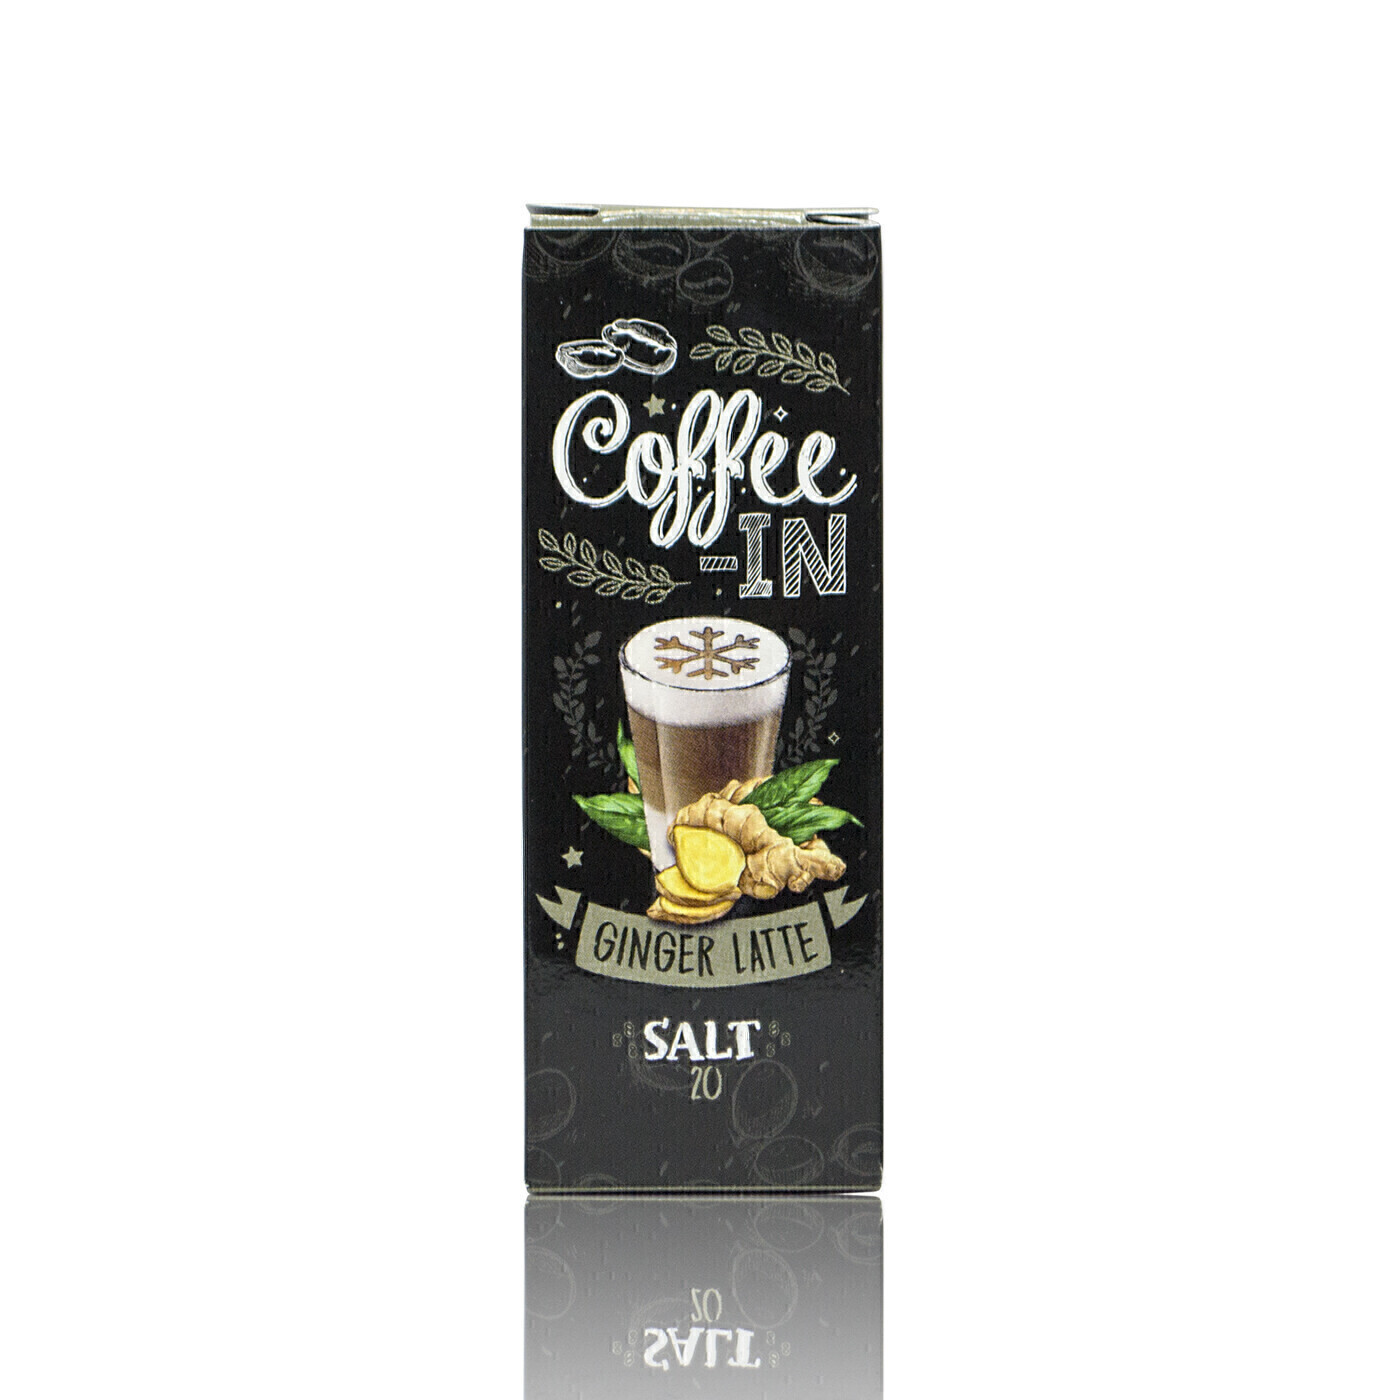 COFFEE-IN SALT: GINGER LATTE 30ML 20MG STRONG